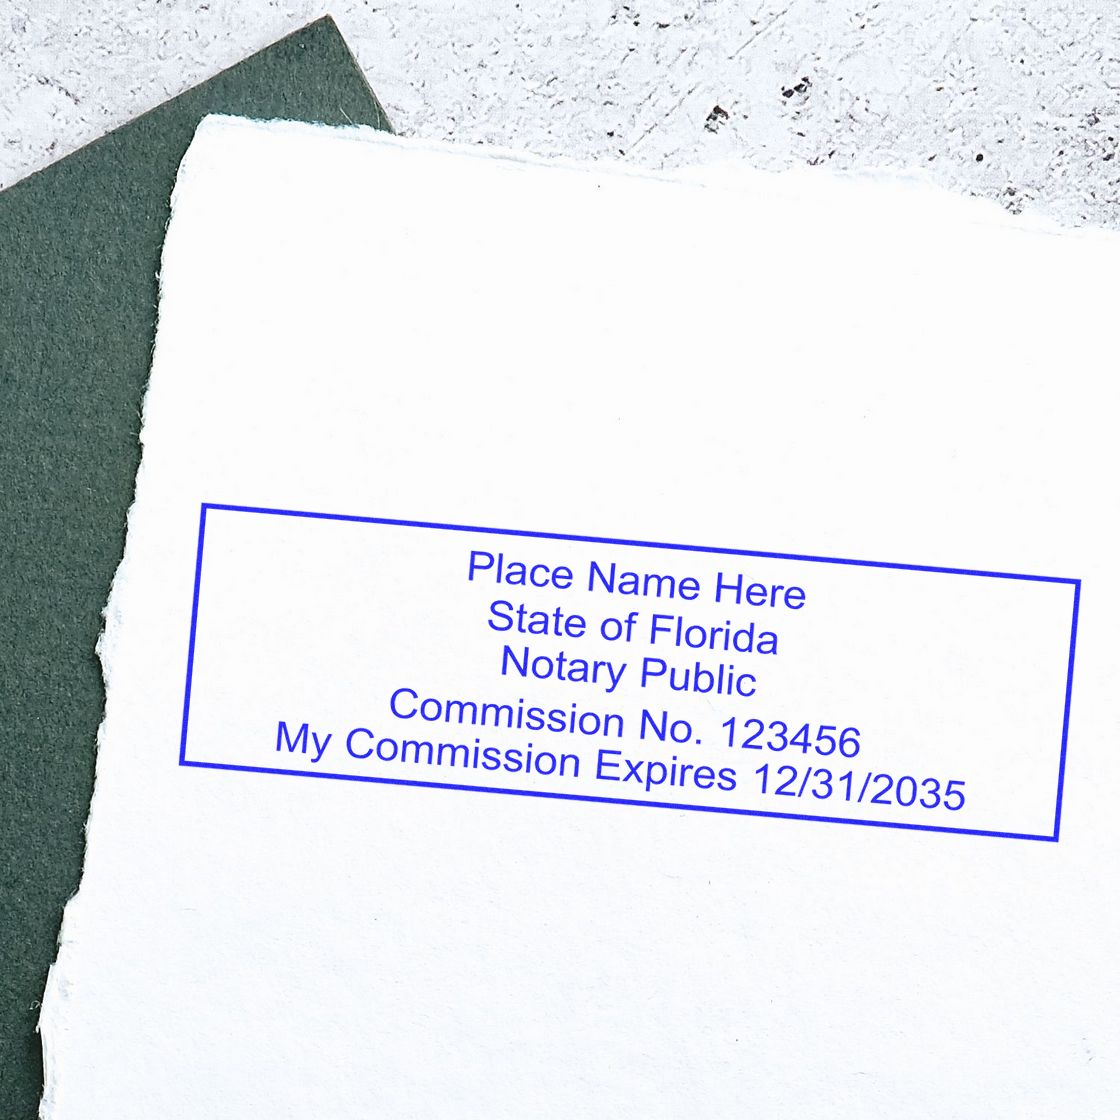 An alternative view of the PSI Florida Notary Stamp stamped on a sheet of paper showing the image in use